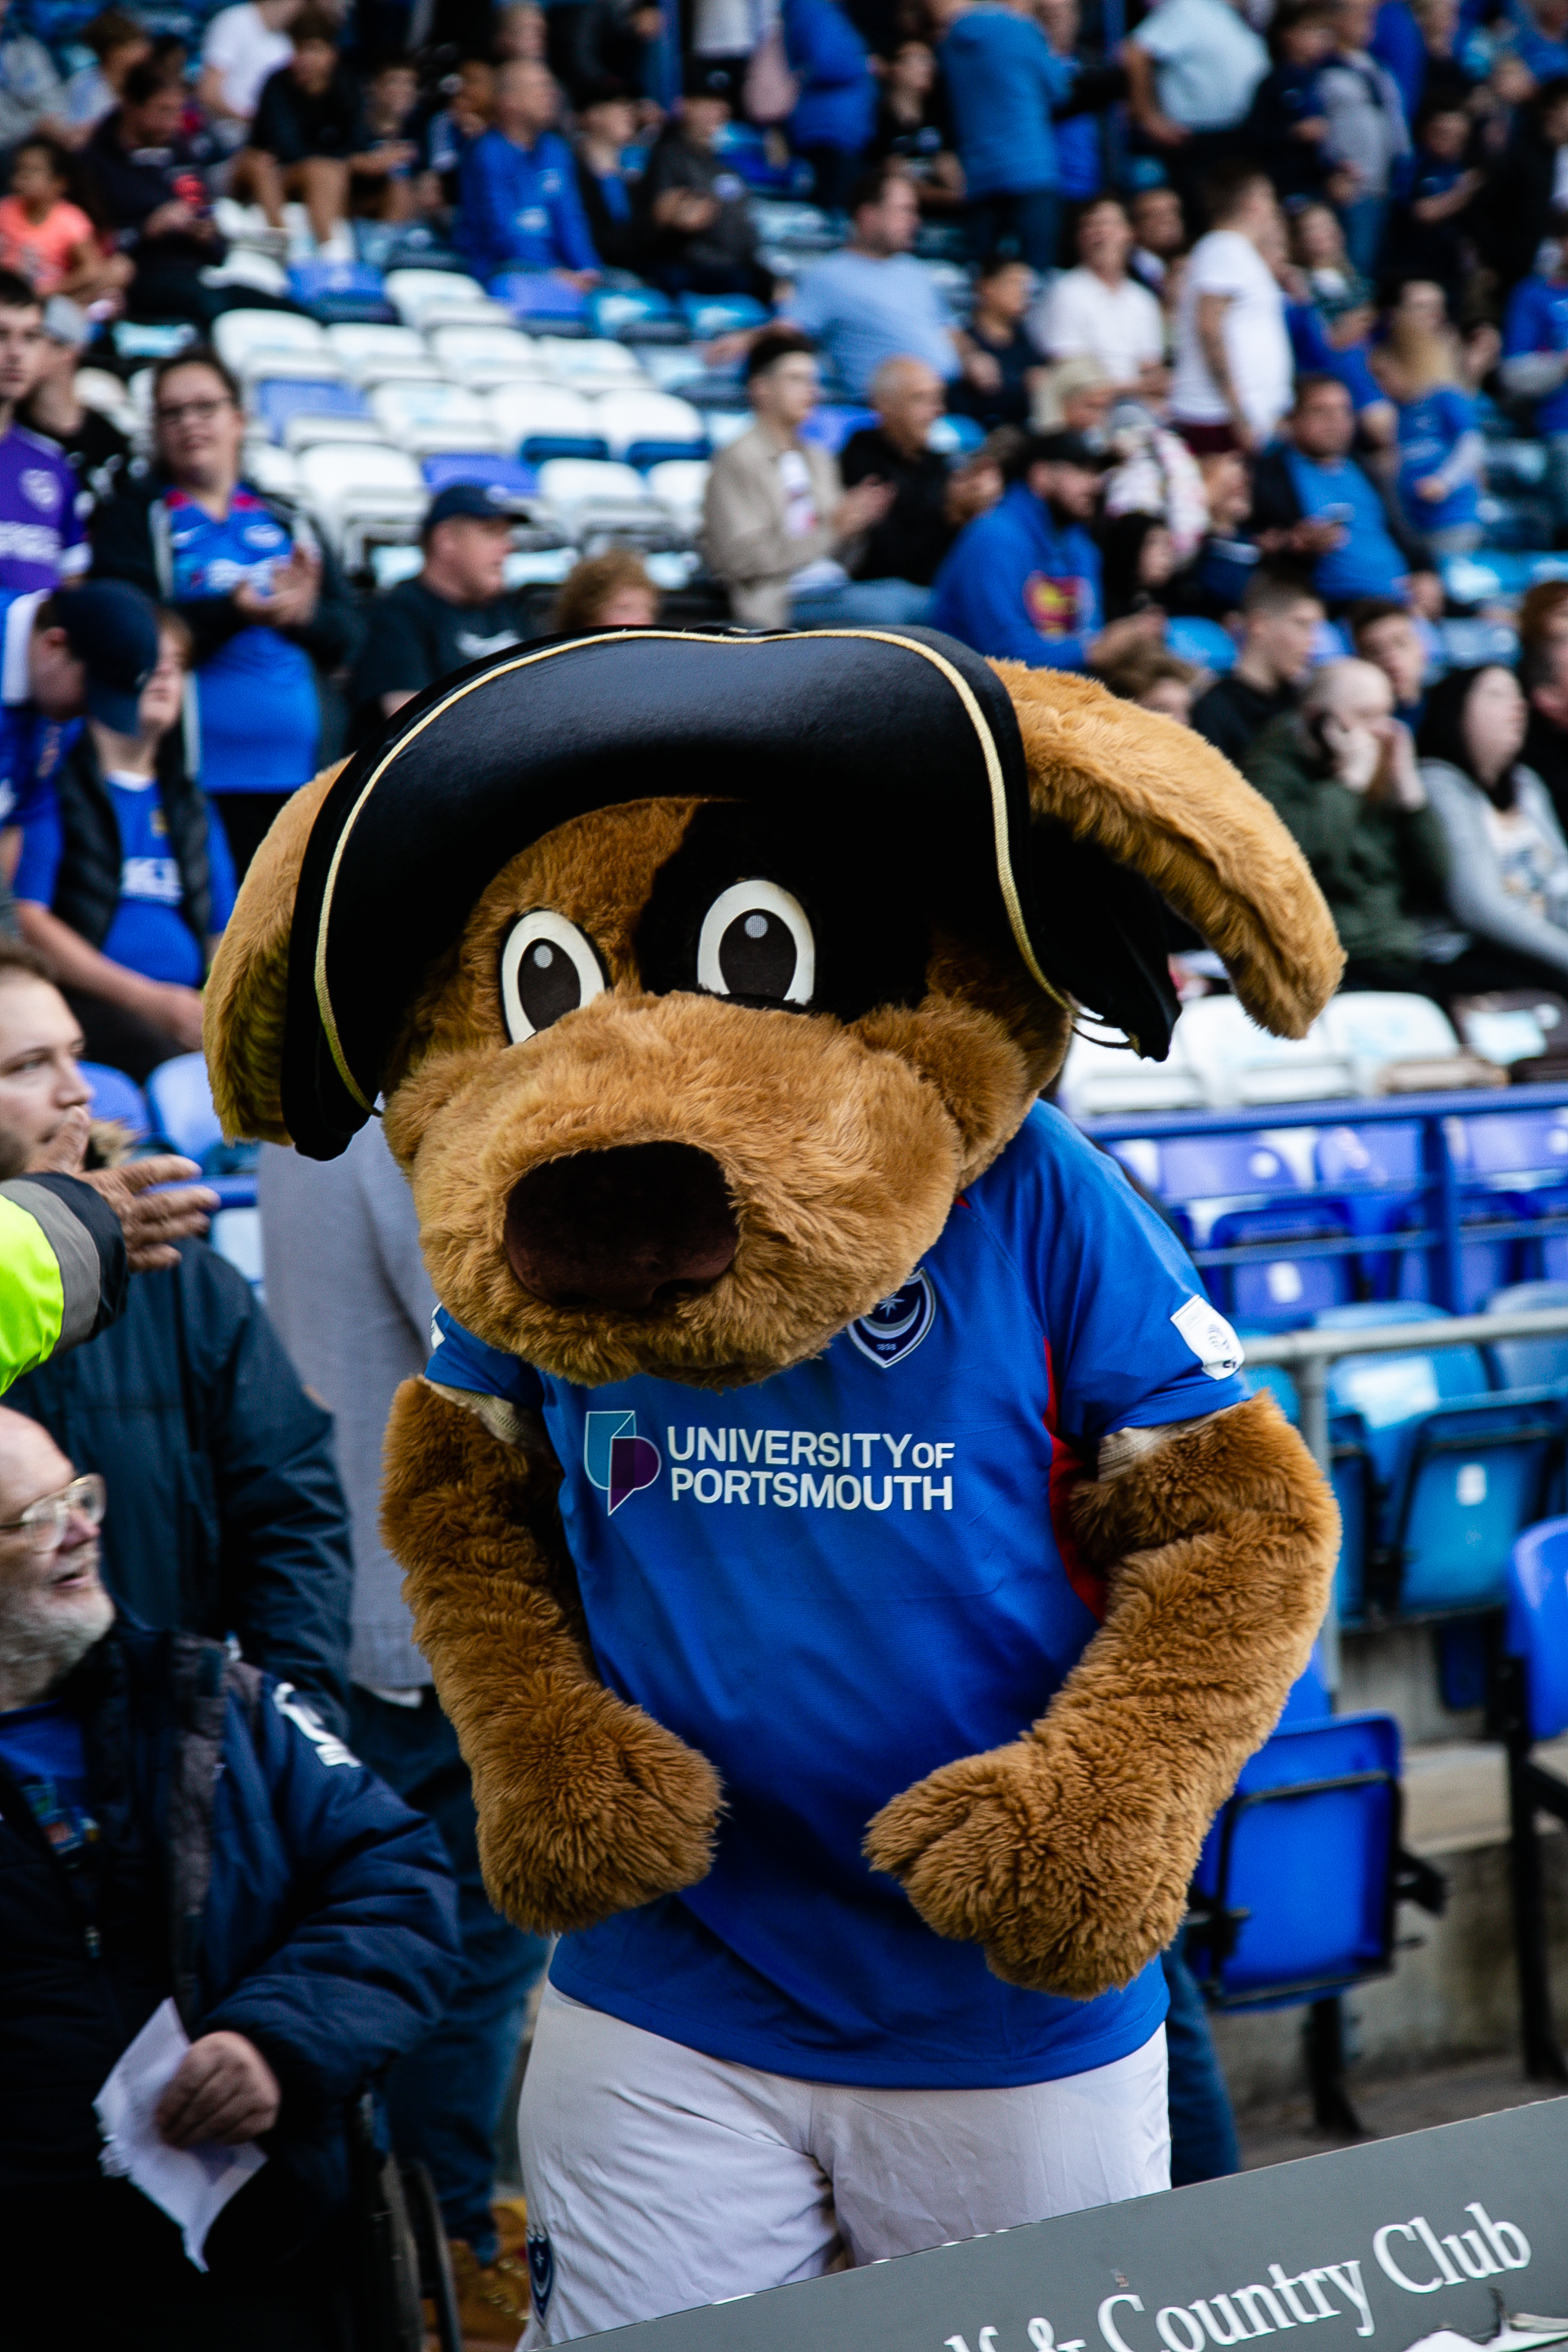 Covers Chichester to host Portsmouth FC players ‘Meet & Greet’ this October half term